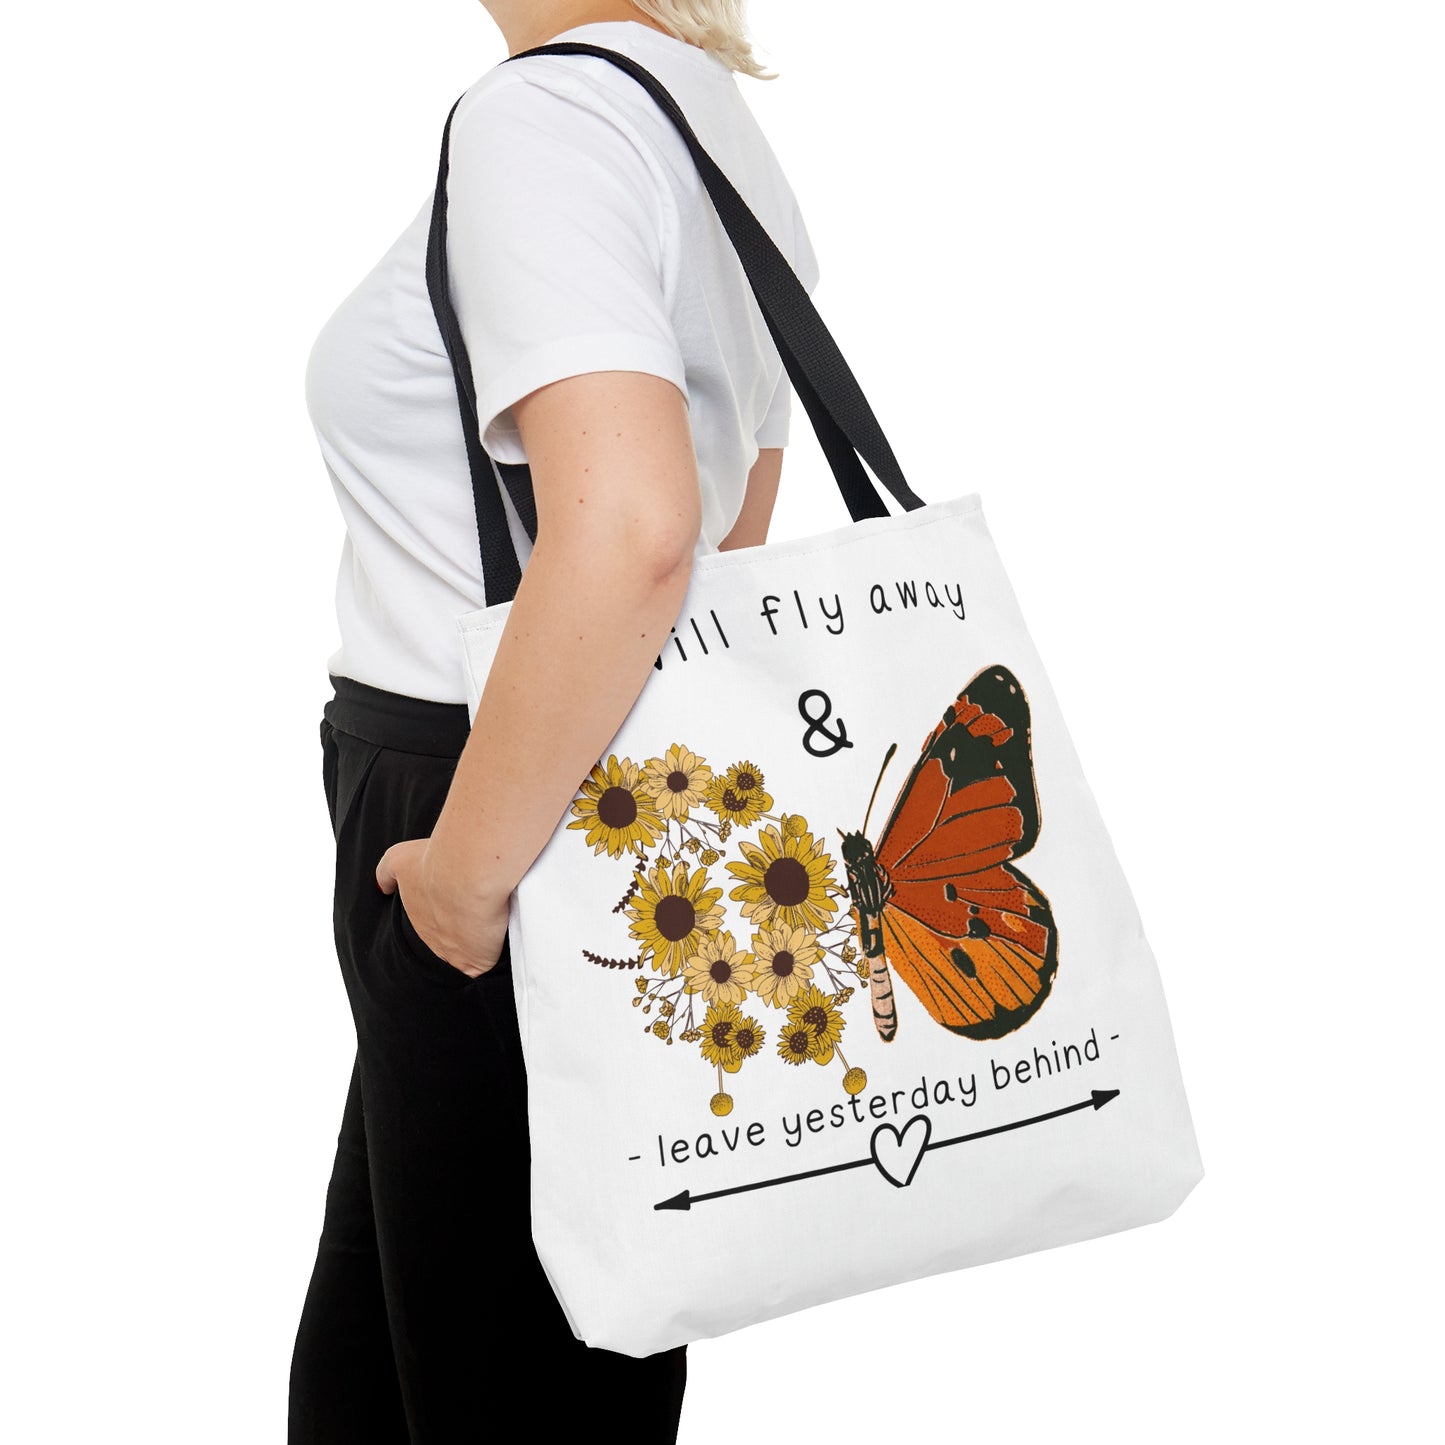 Beautiful “I will fly away & leave yesterday behind” inspirational Tote Bag in 3 sizes to meet your needs.